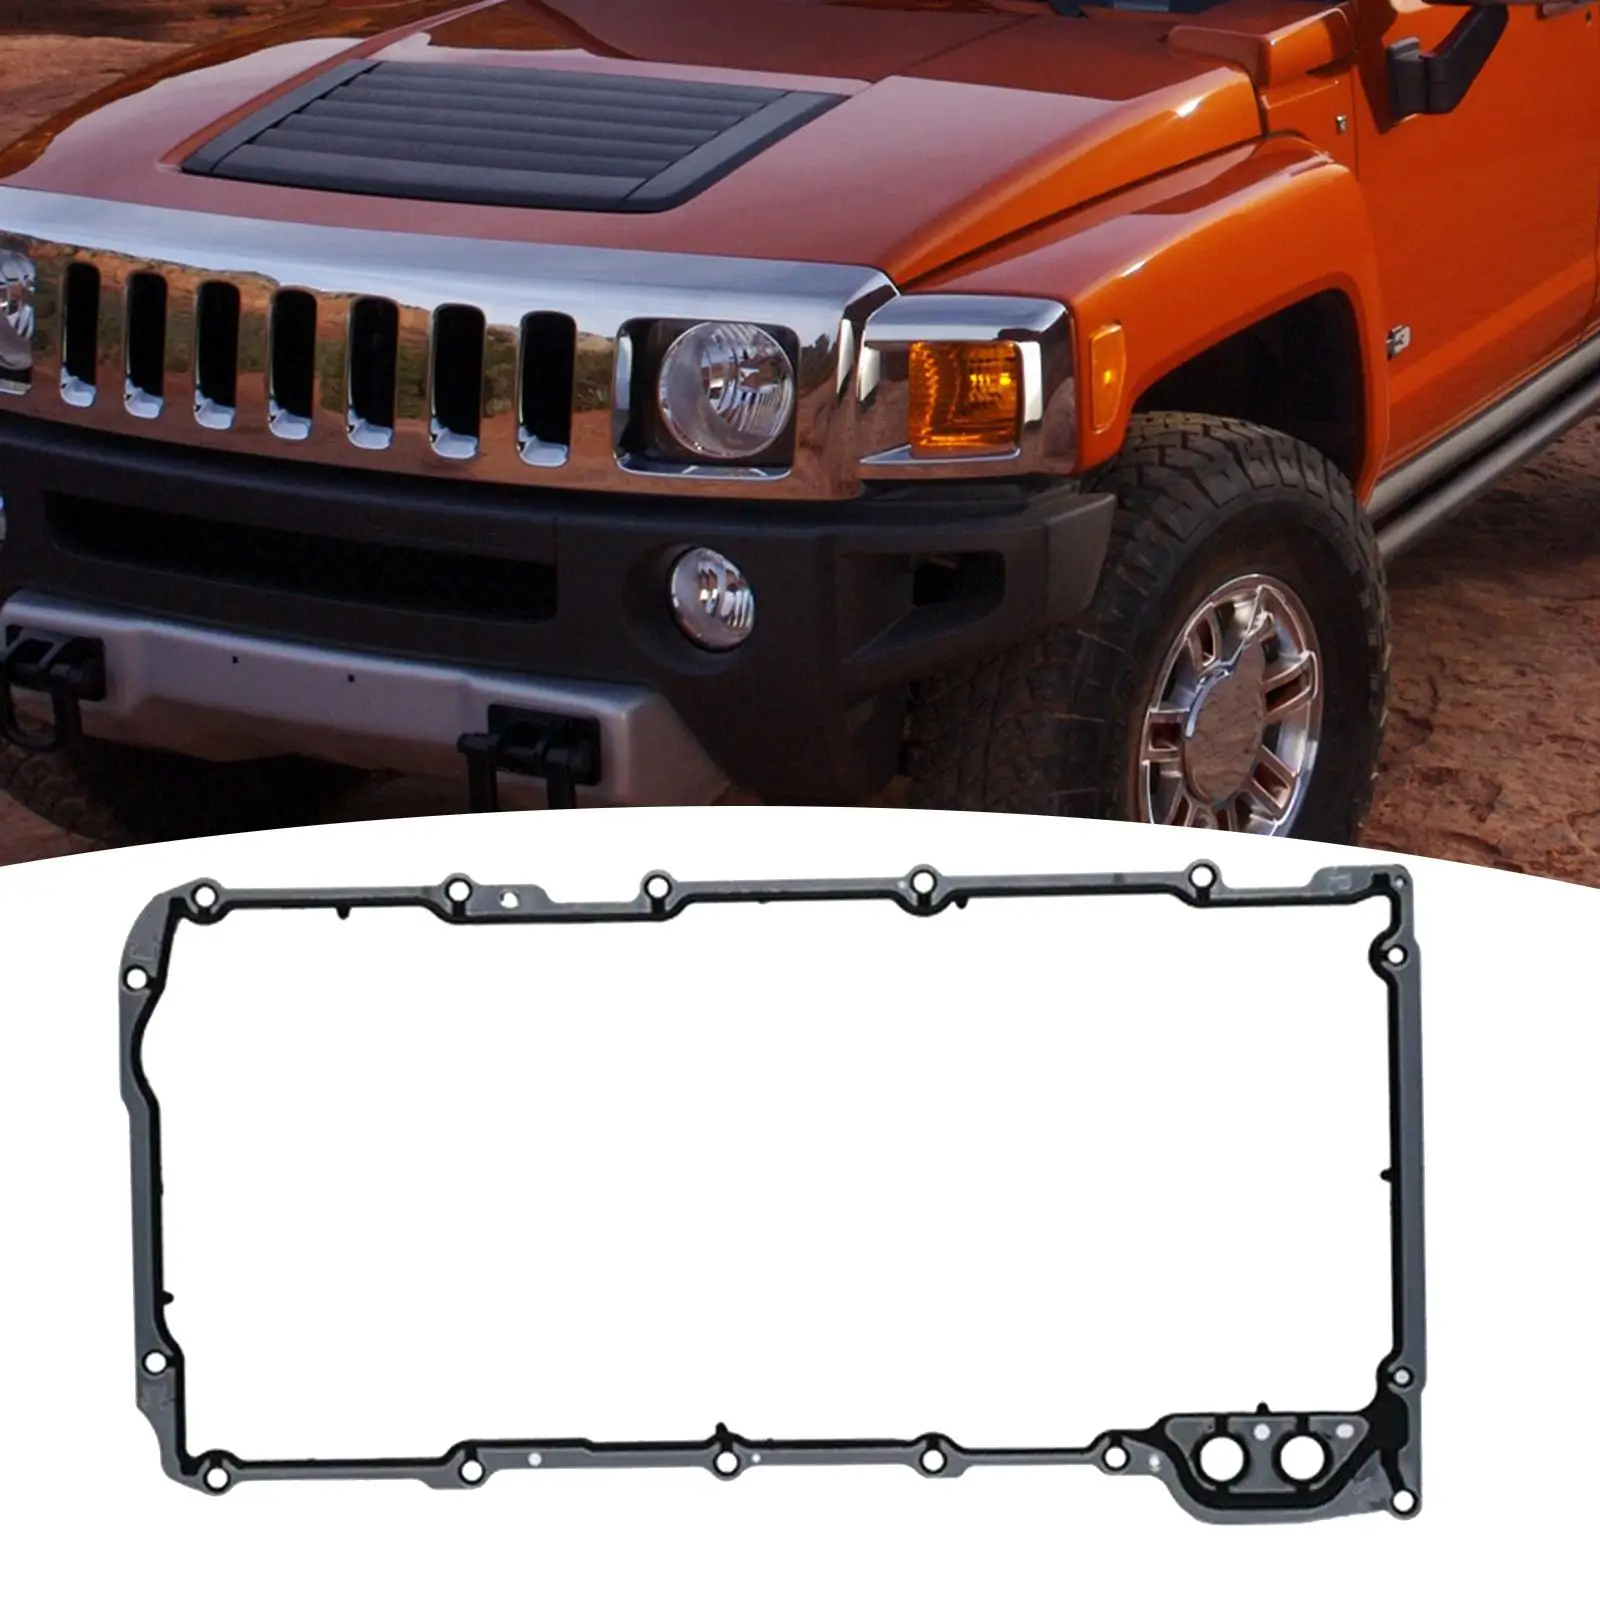 Cylinder Engine Oil Pan Gasket for Hummer Easy to Install Premium